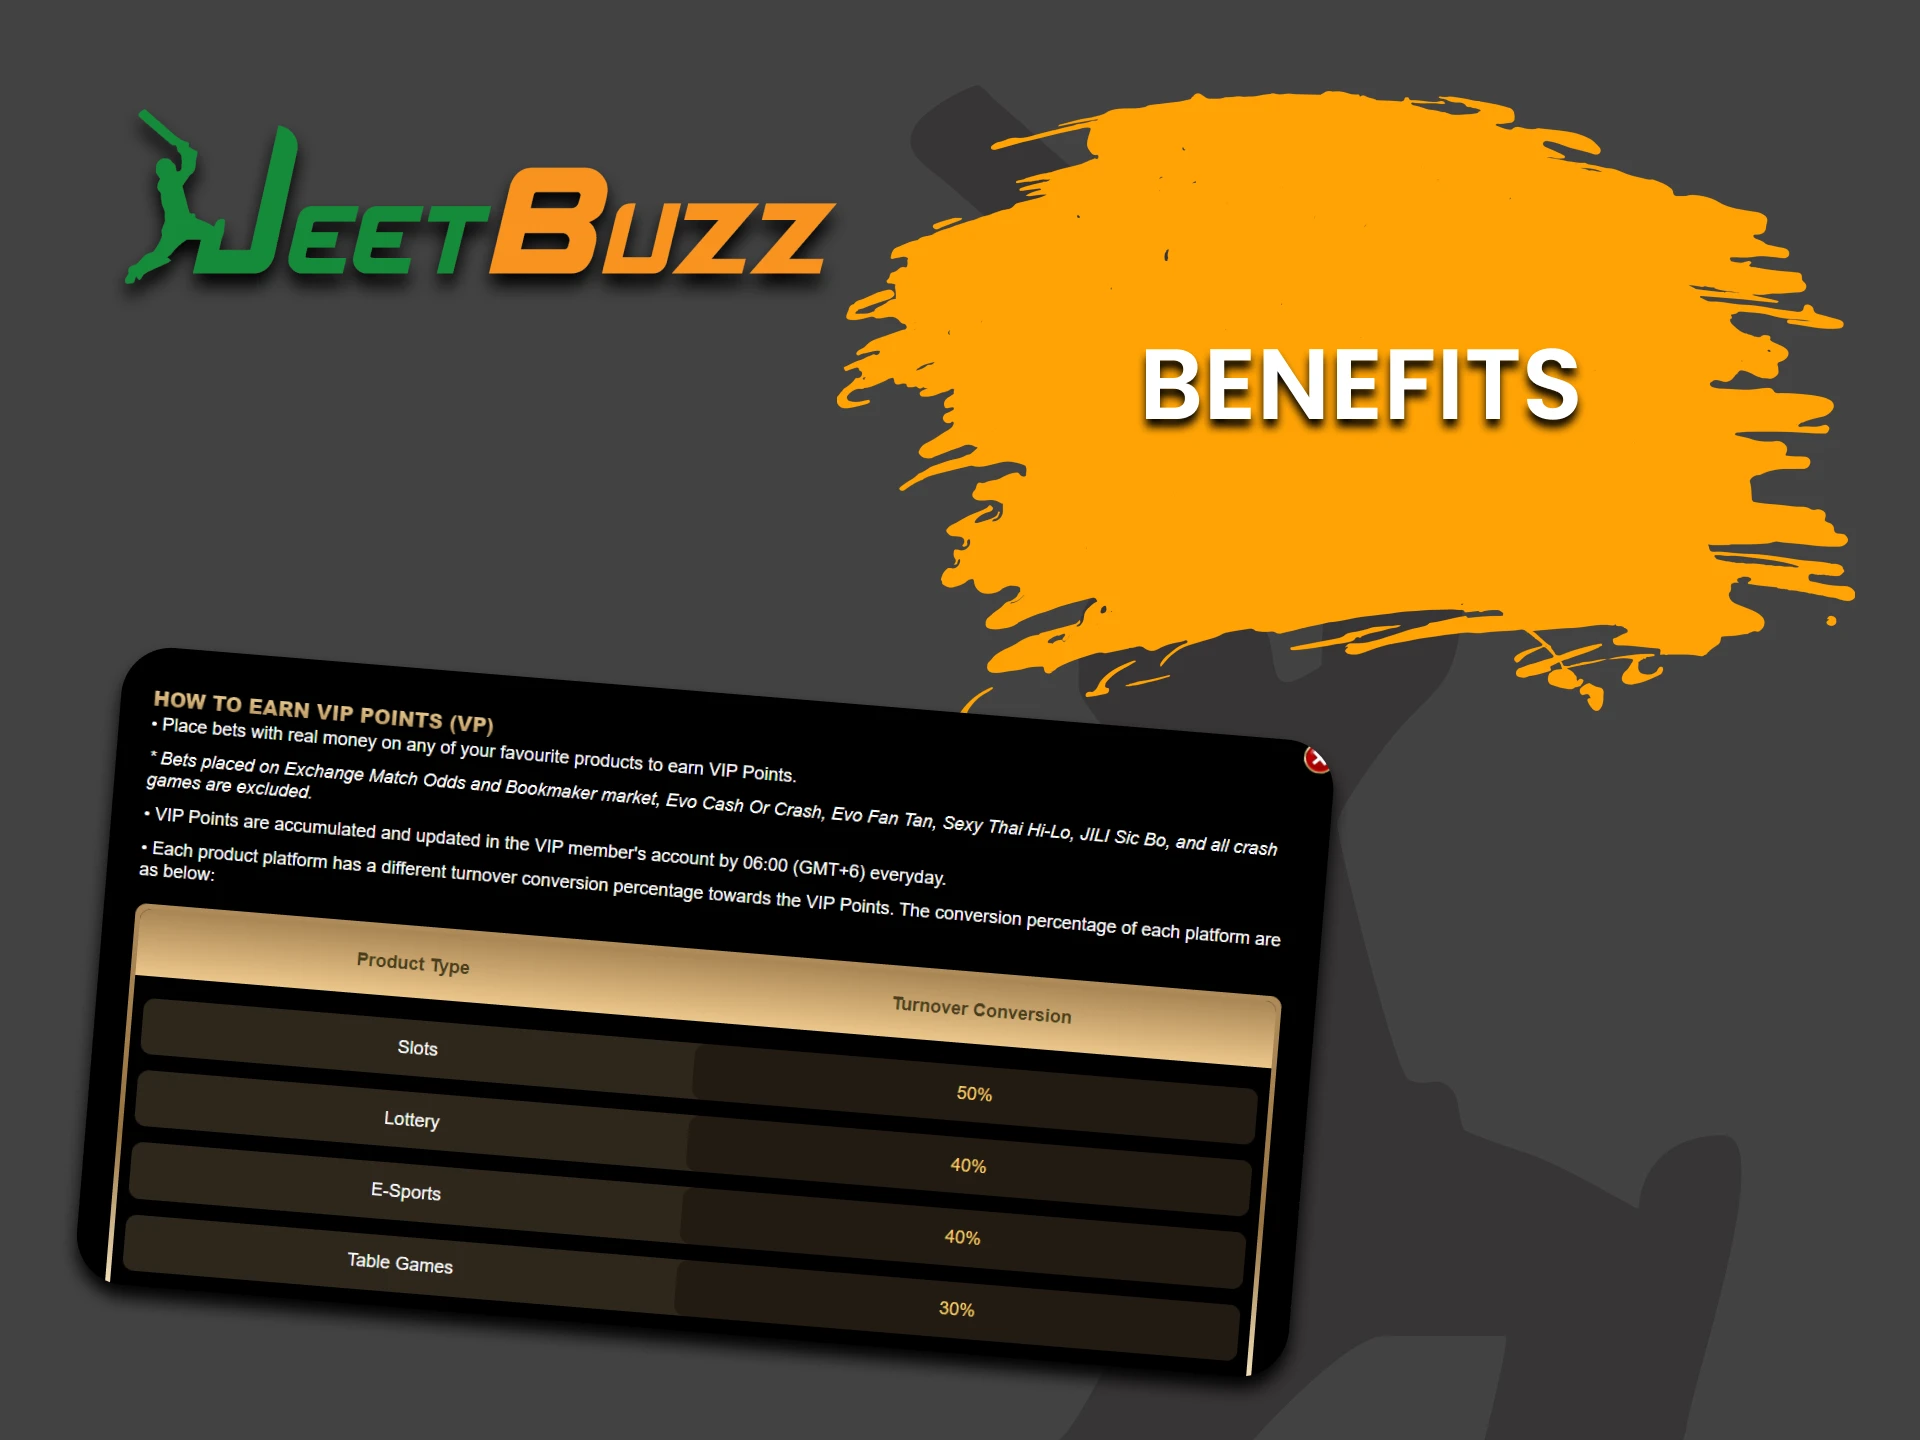 We will tell you about the benefits of participating in the JeetBuzz VIP Club.